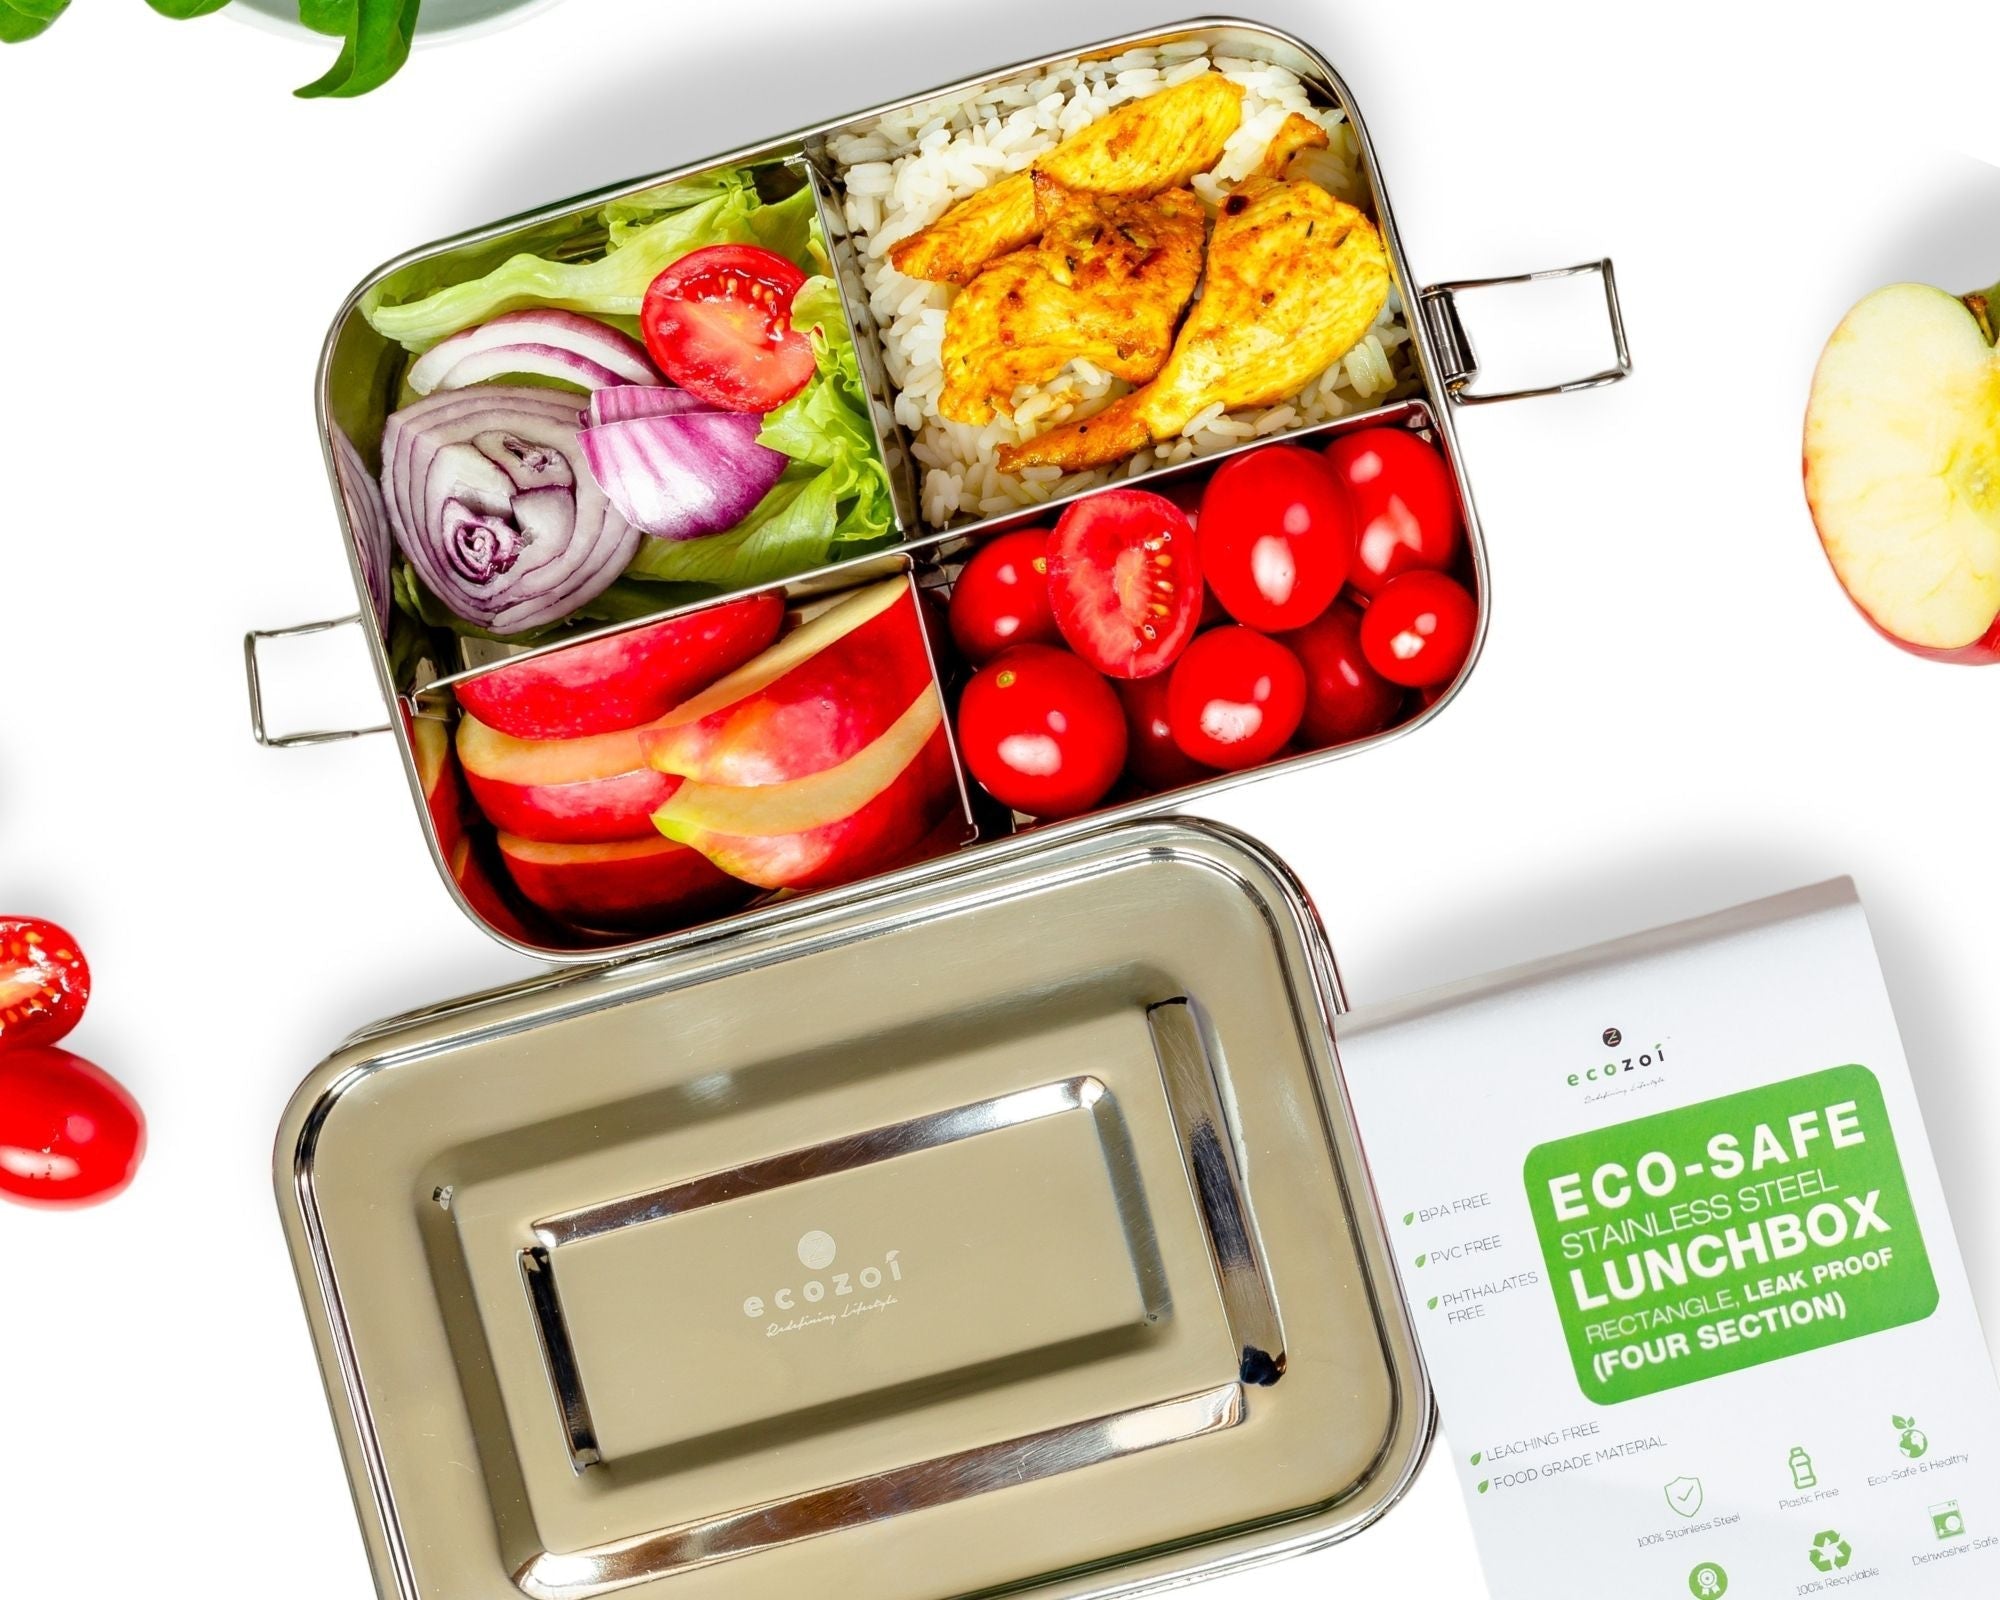 Lava Lunch - The top storage compartment of your Lava Lunch box